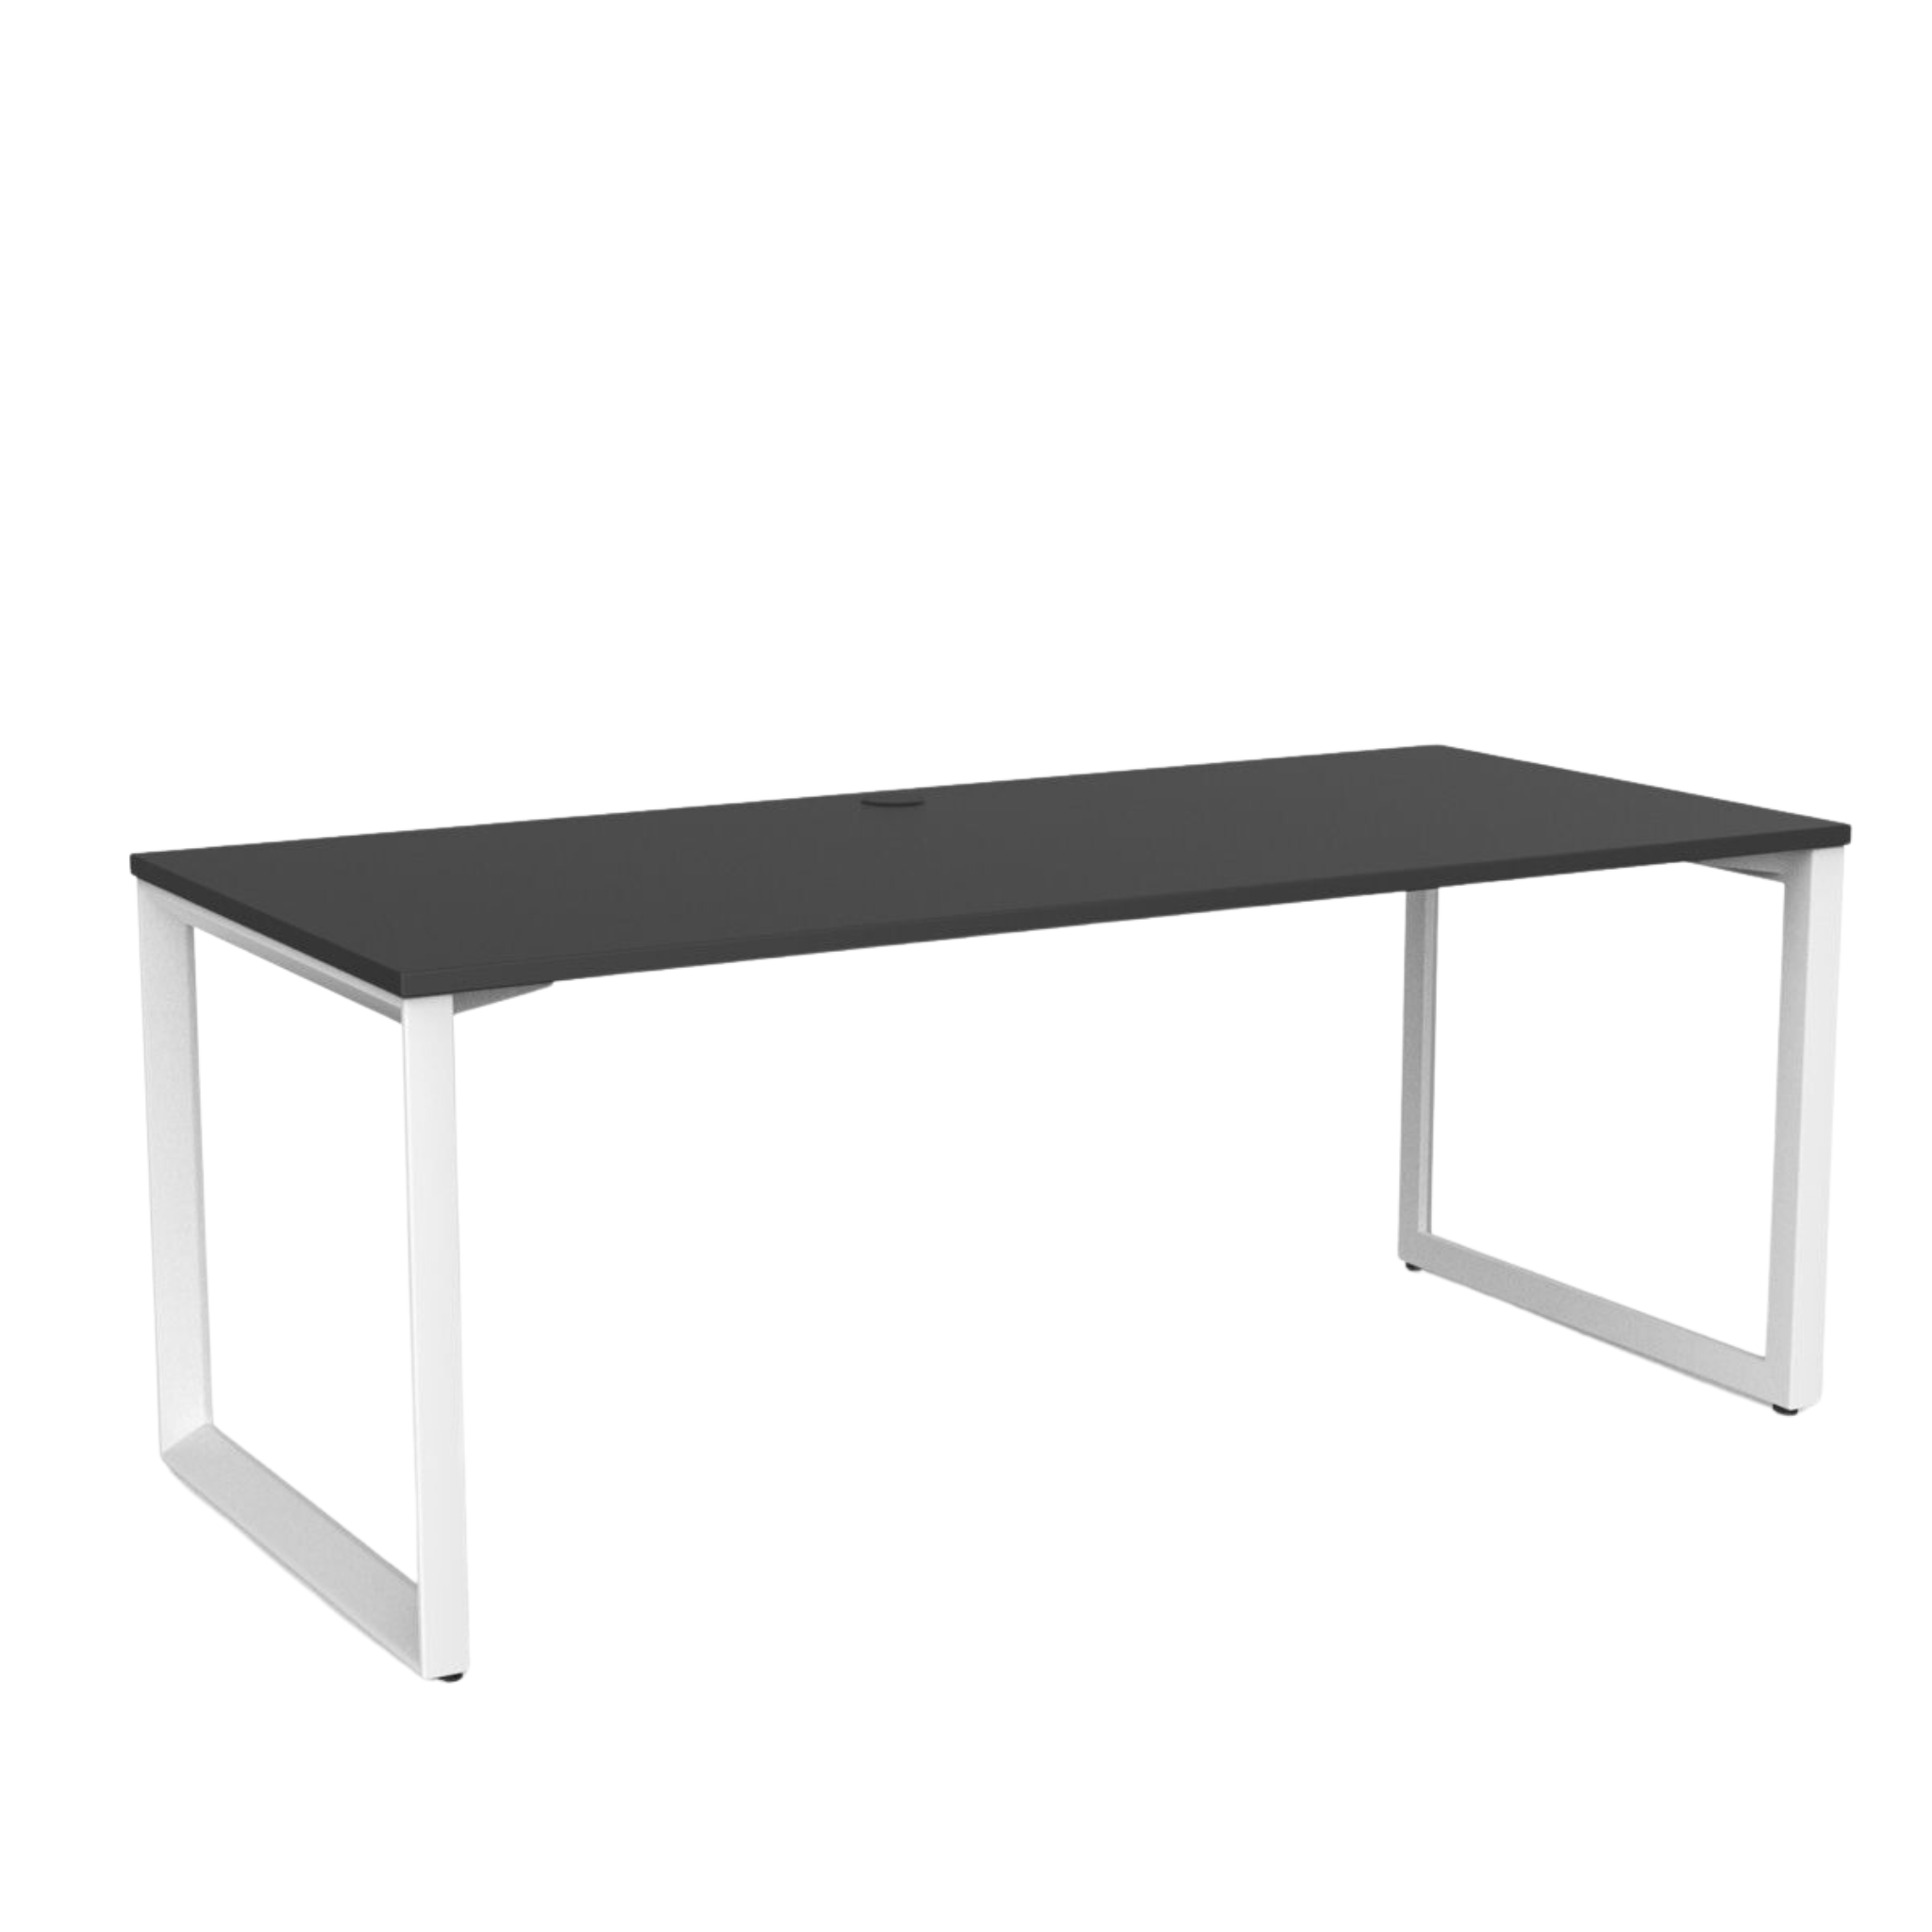 Anvil fixed height desk with white metal frame and black metleca top